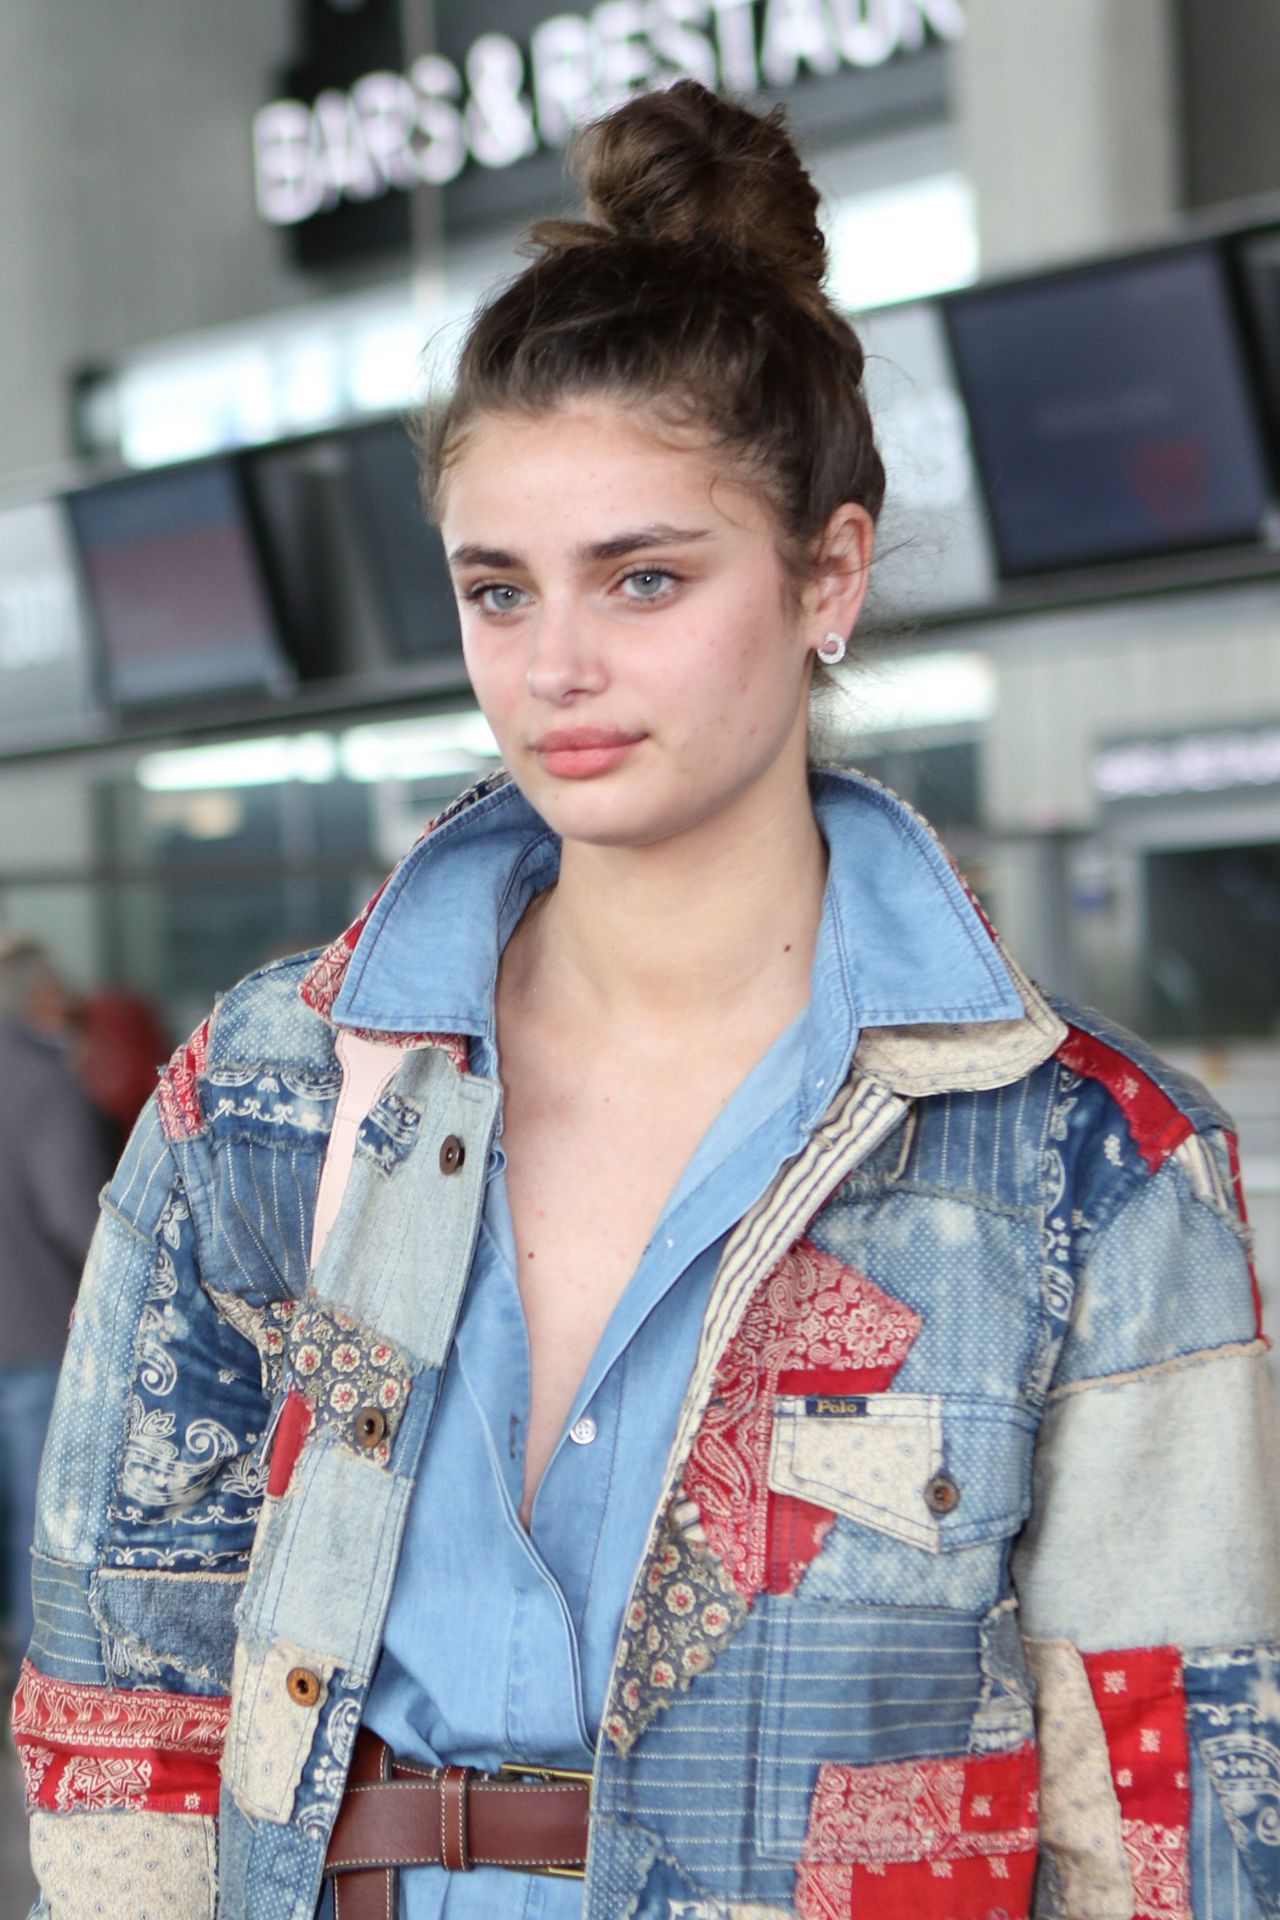 taylor-hill-leaves-from-nice-airport-05-19-2019-6.jpg